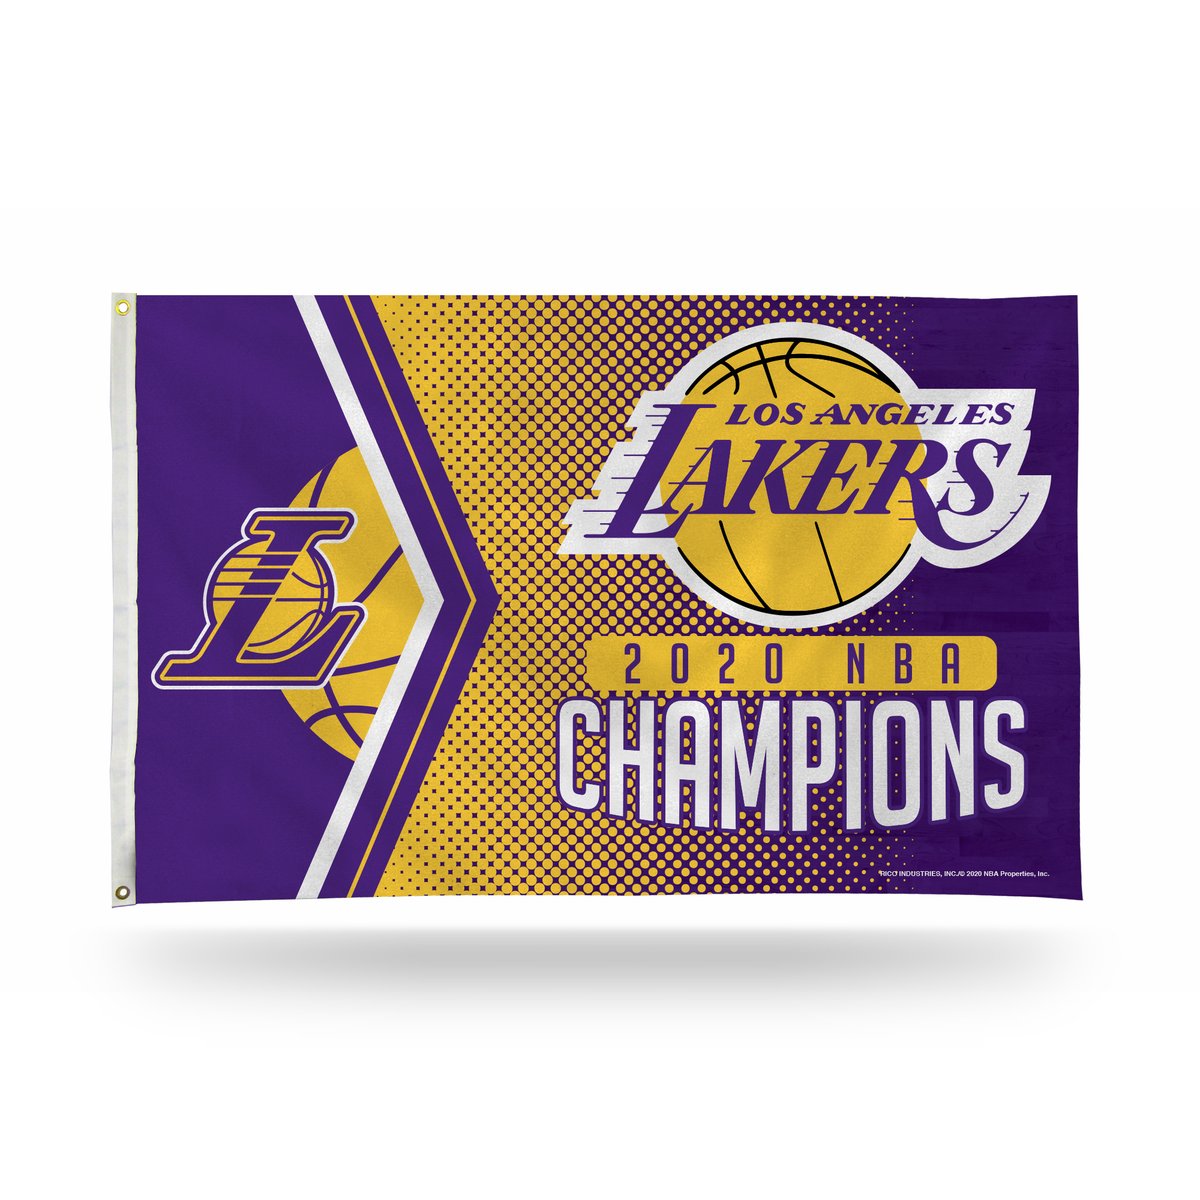 L.A. Lakers Flag-3x5FT Banner-100% polyester - flagsshop